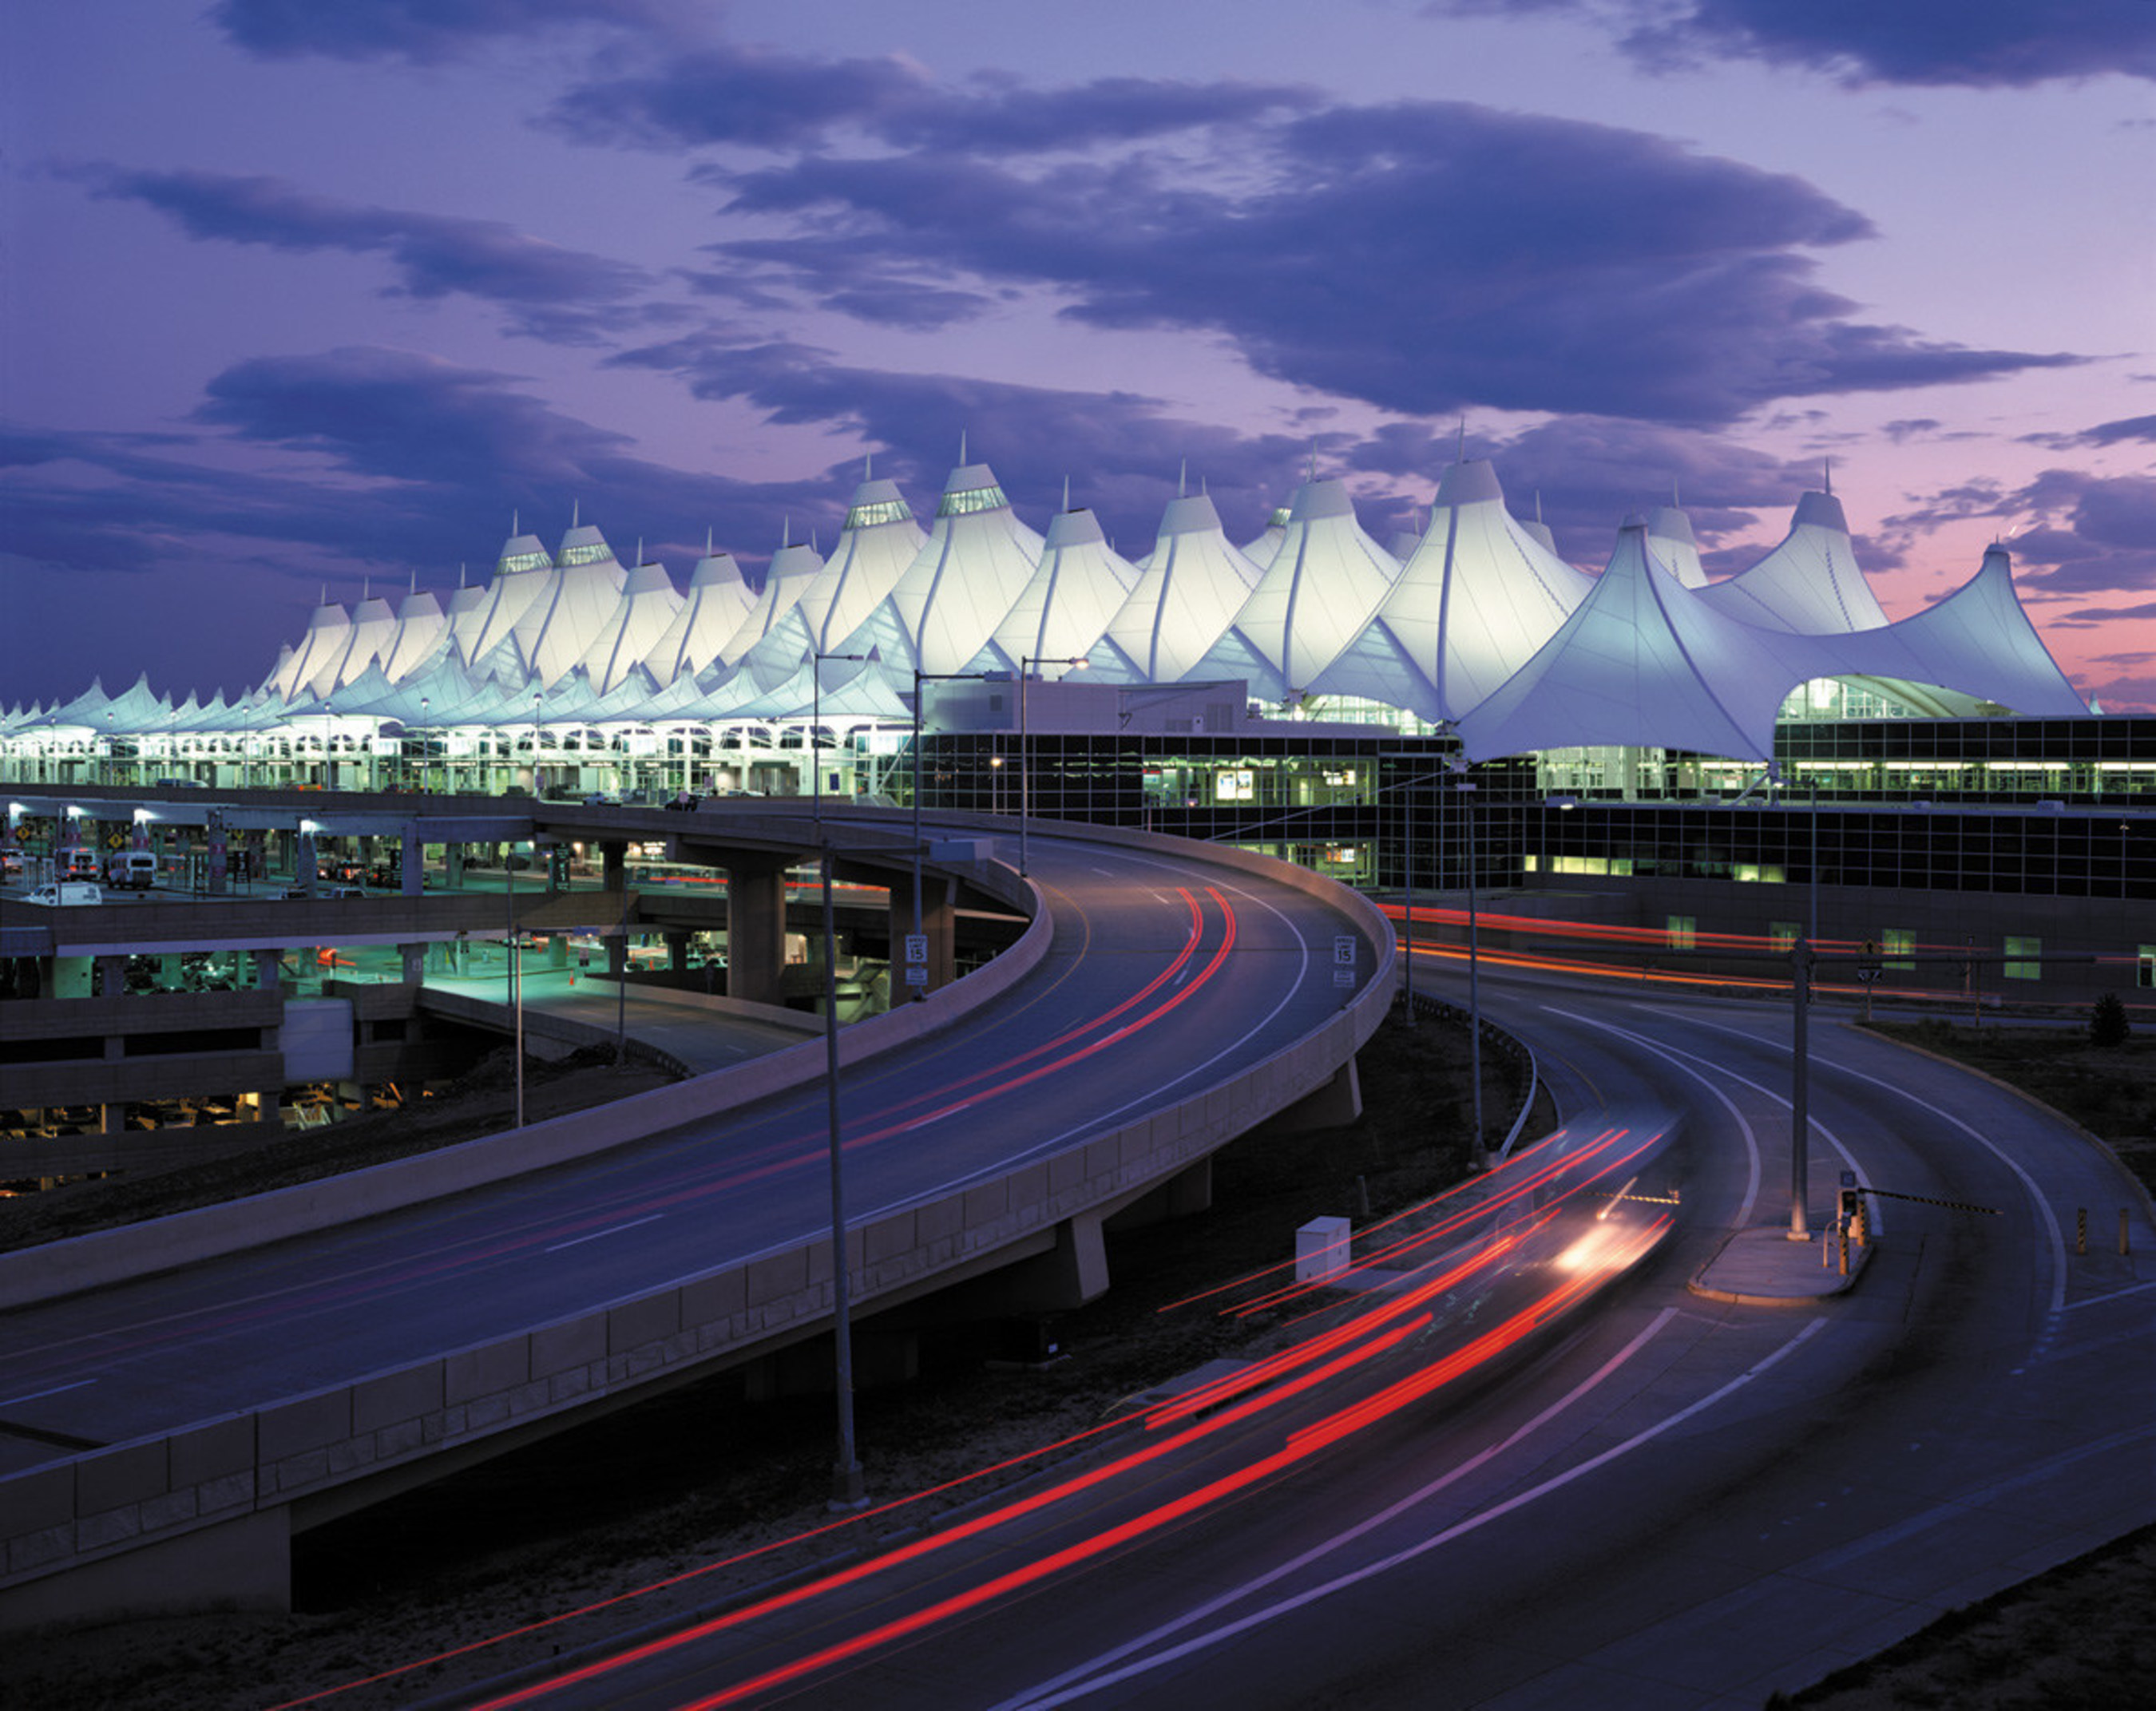 DEN is one of the busiest airports in the world and was recently ranked 8th among the world's 50 busiest megahubs. New rail and air connections at the airport are expected to grow tourism and foster new meeting and convention business in the Mile High City.